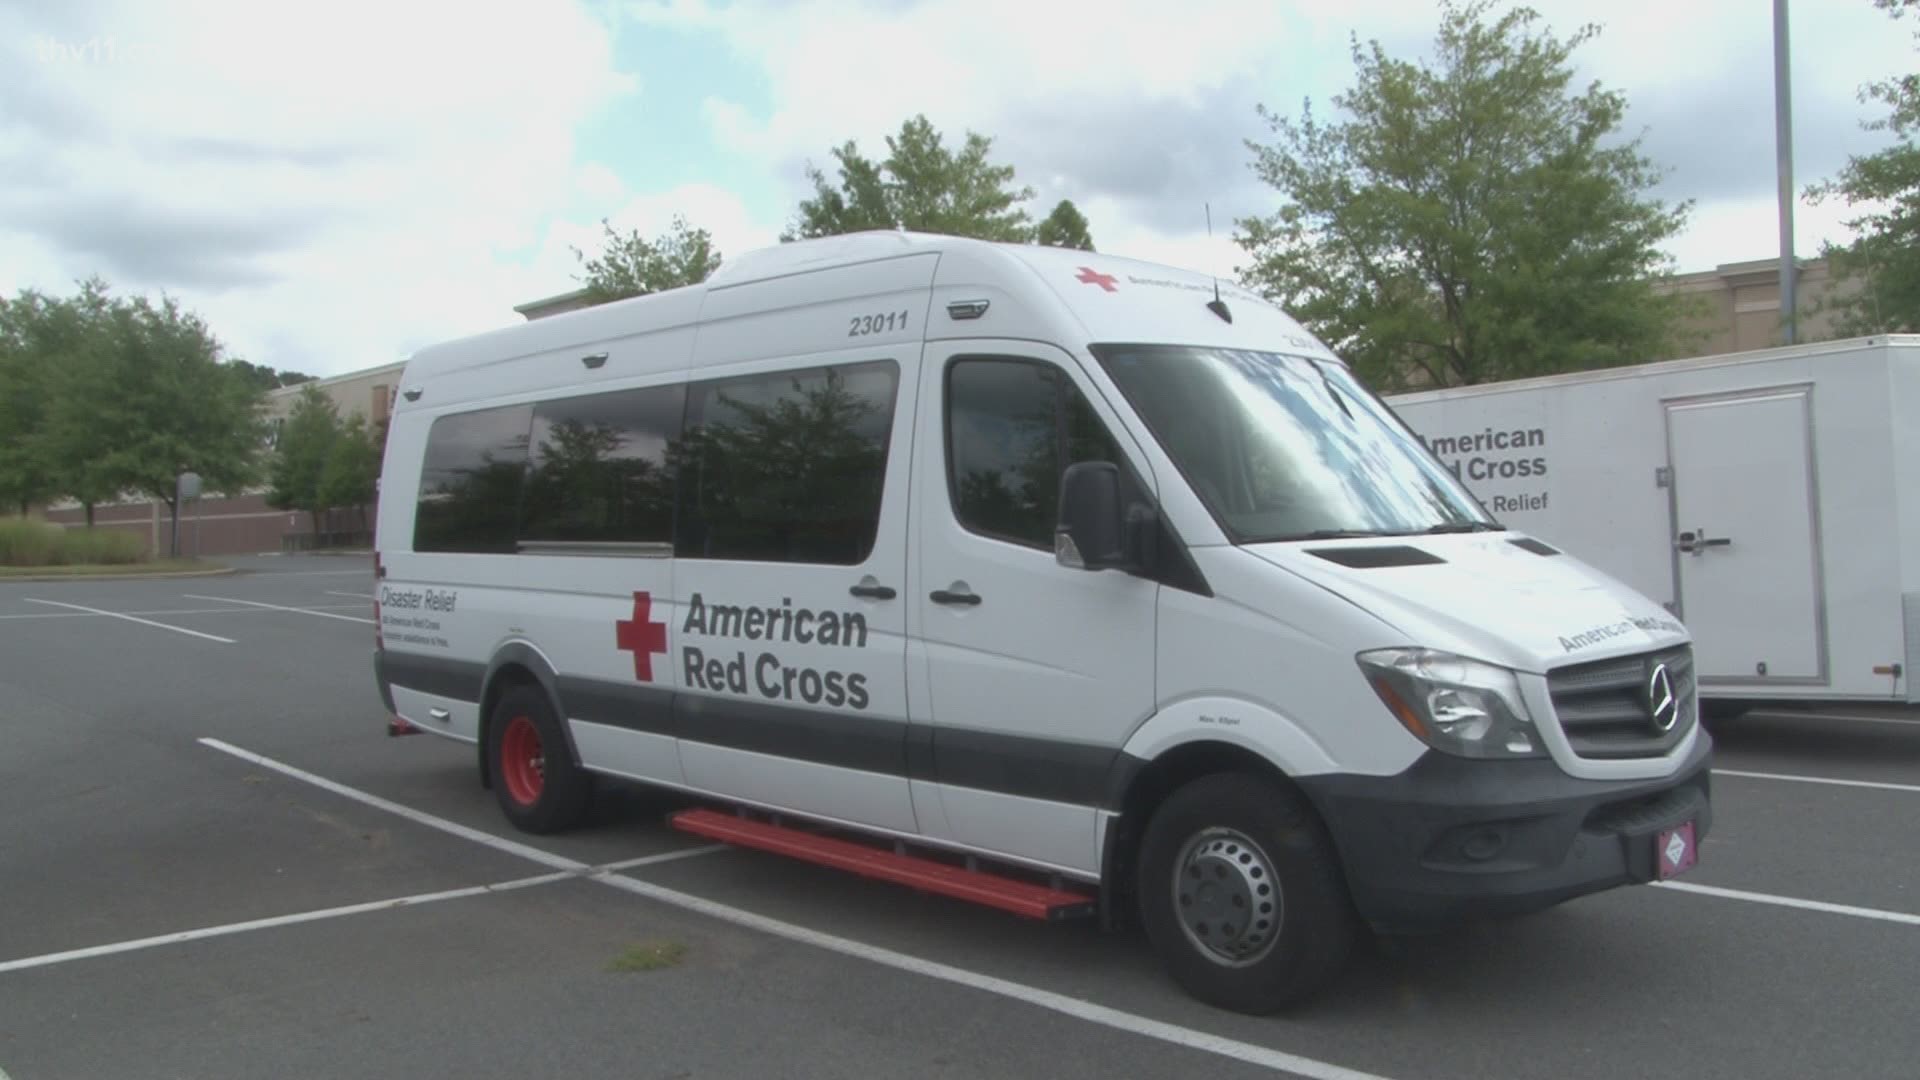 The American Red Cross was at the Shackleford Crossing in west Little Rock gathering volunteers to help out with emergencies.